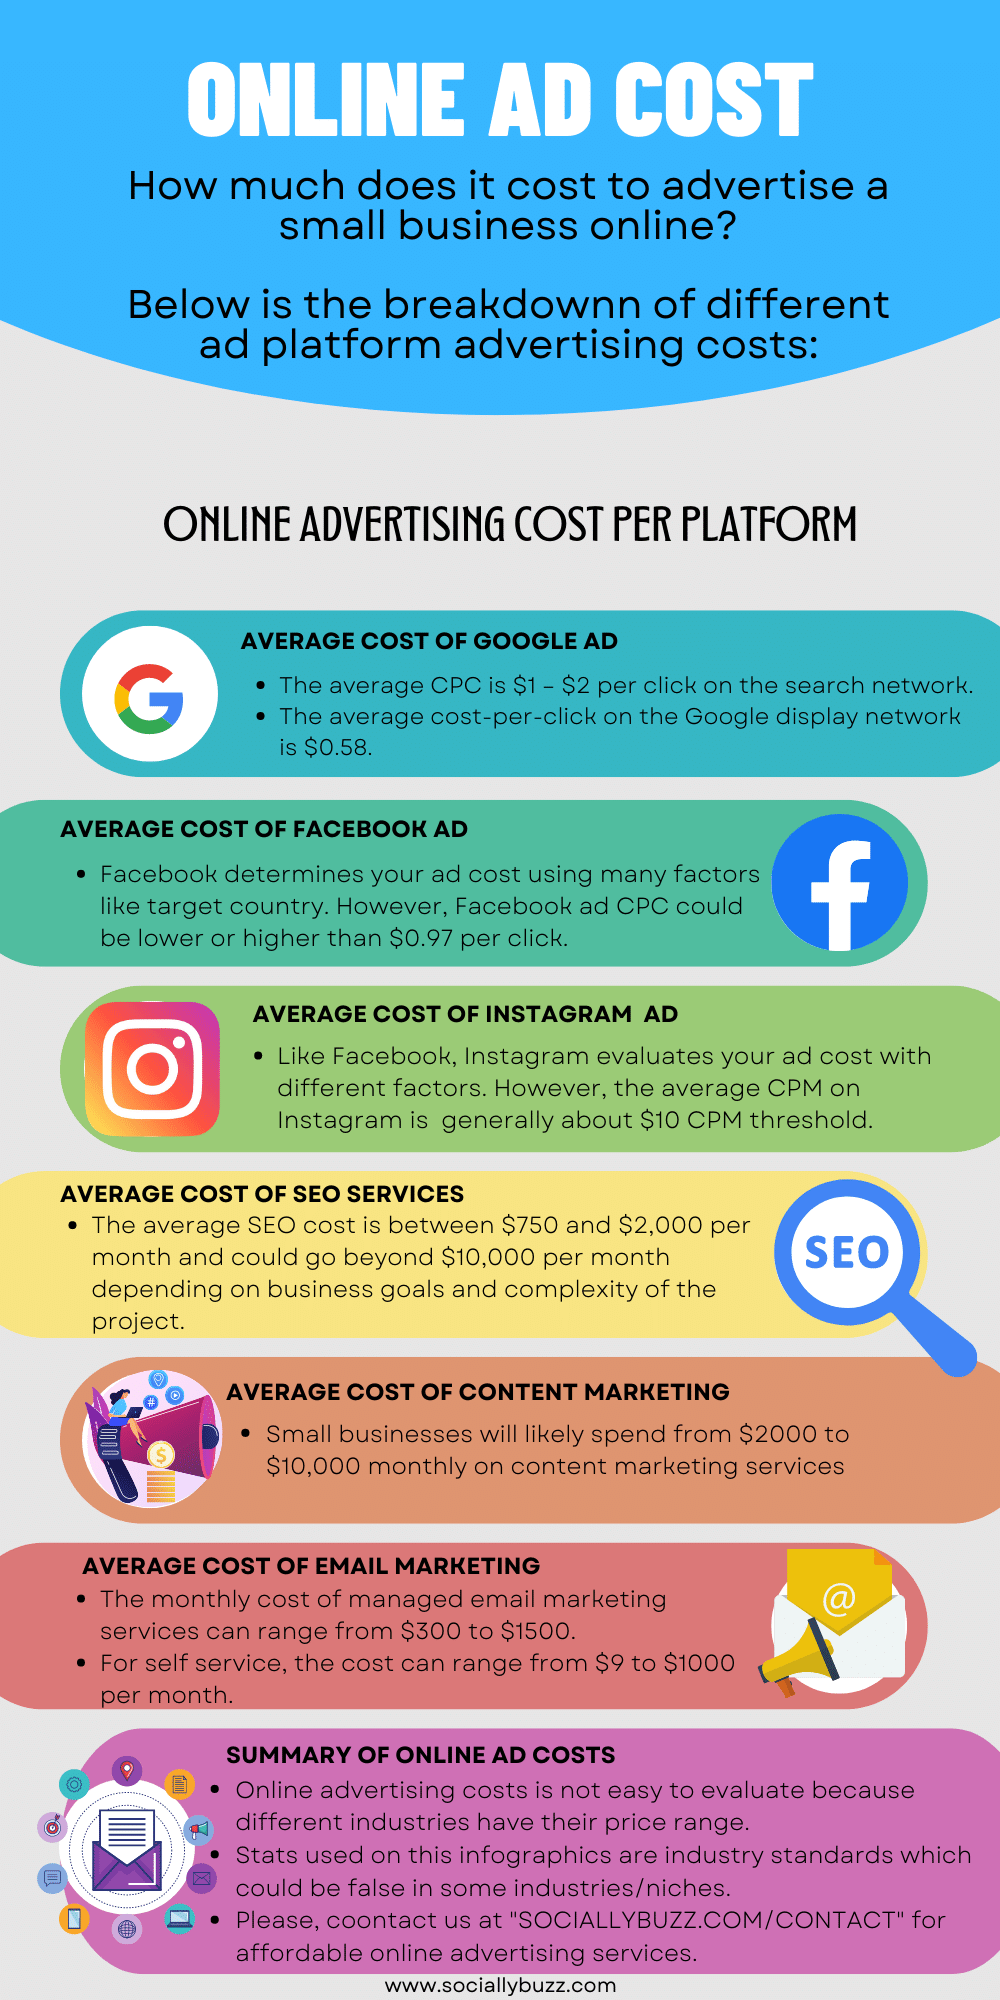 Online ad costs How much does it cost to advertise a small business